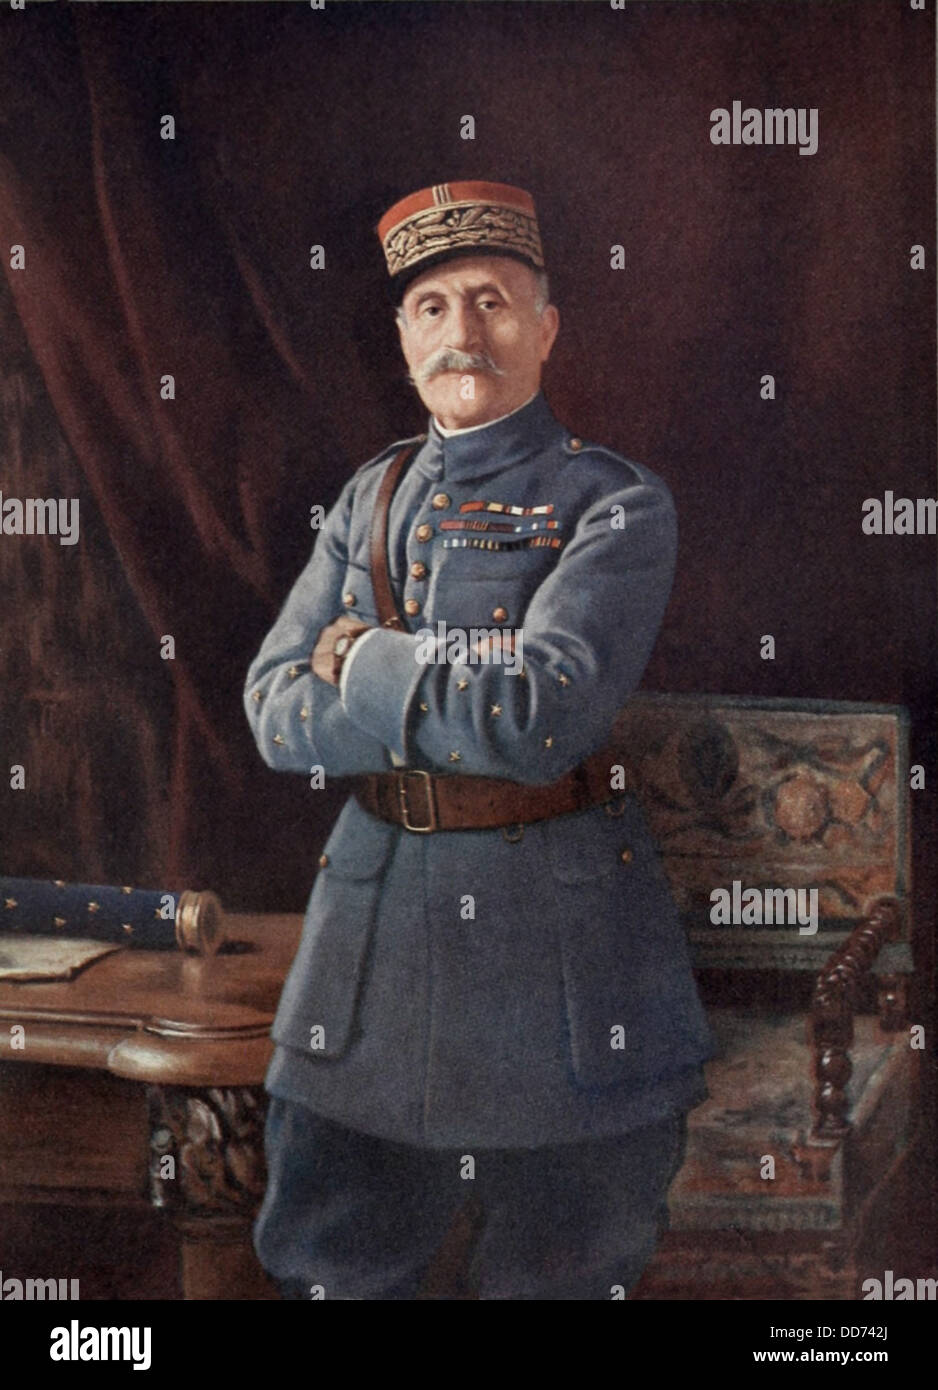 Ferdinand Foch, Chief of the General Staff of the French armies in World War 1. (BSLOC 2013 5 35) Stock Photo